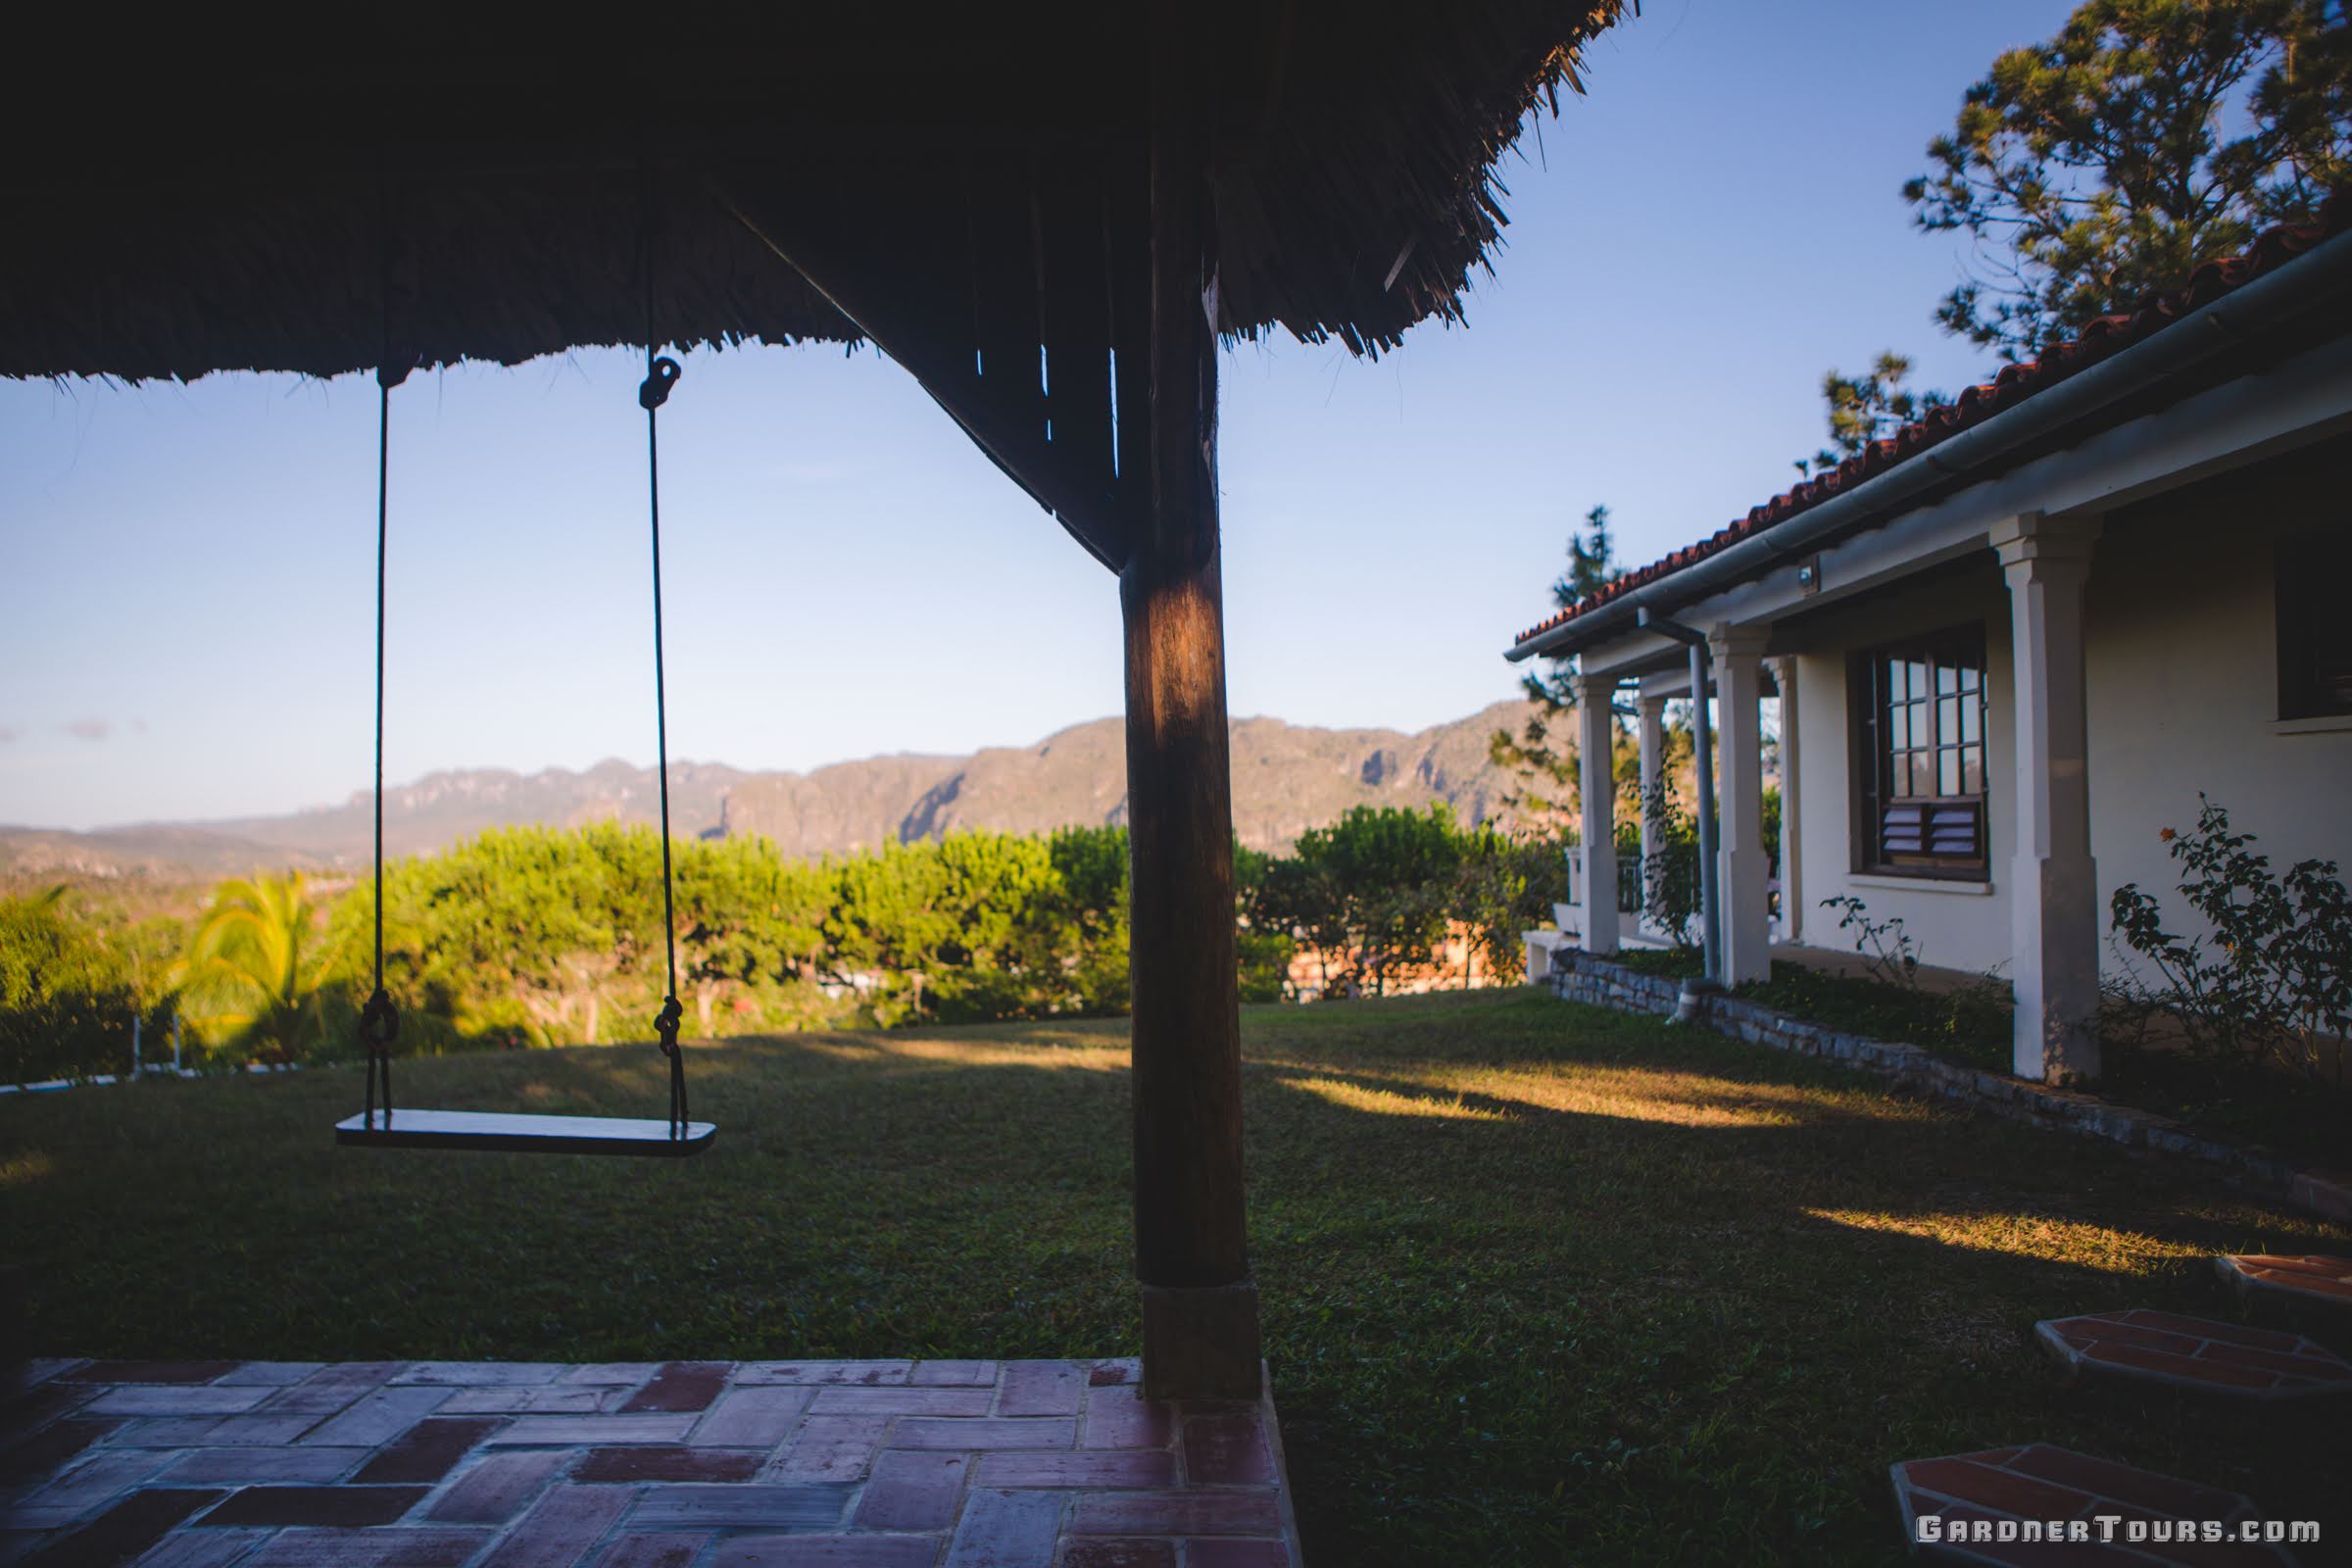 A 4-Star Casa Particular BnB with a beautiful View of the swing, house, and the Vinales Valley